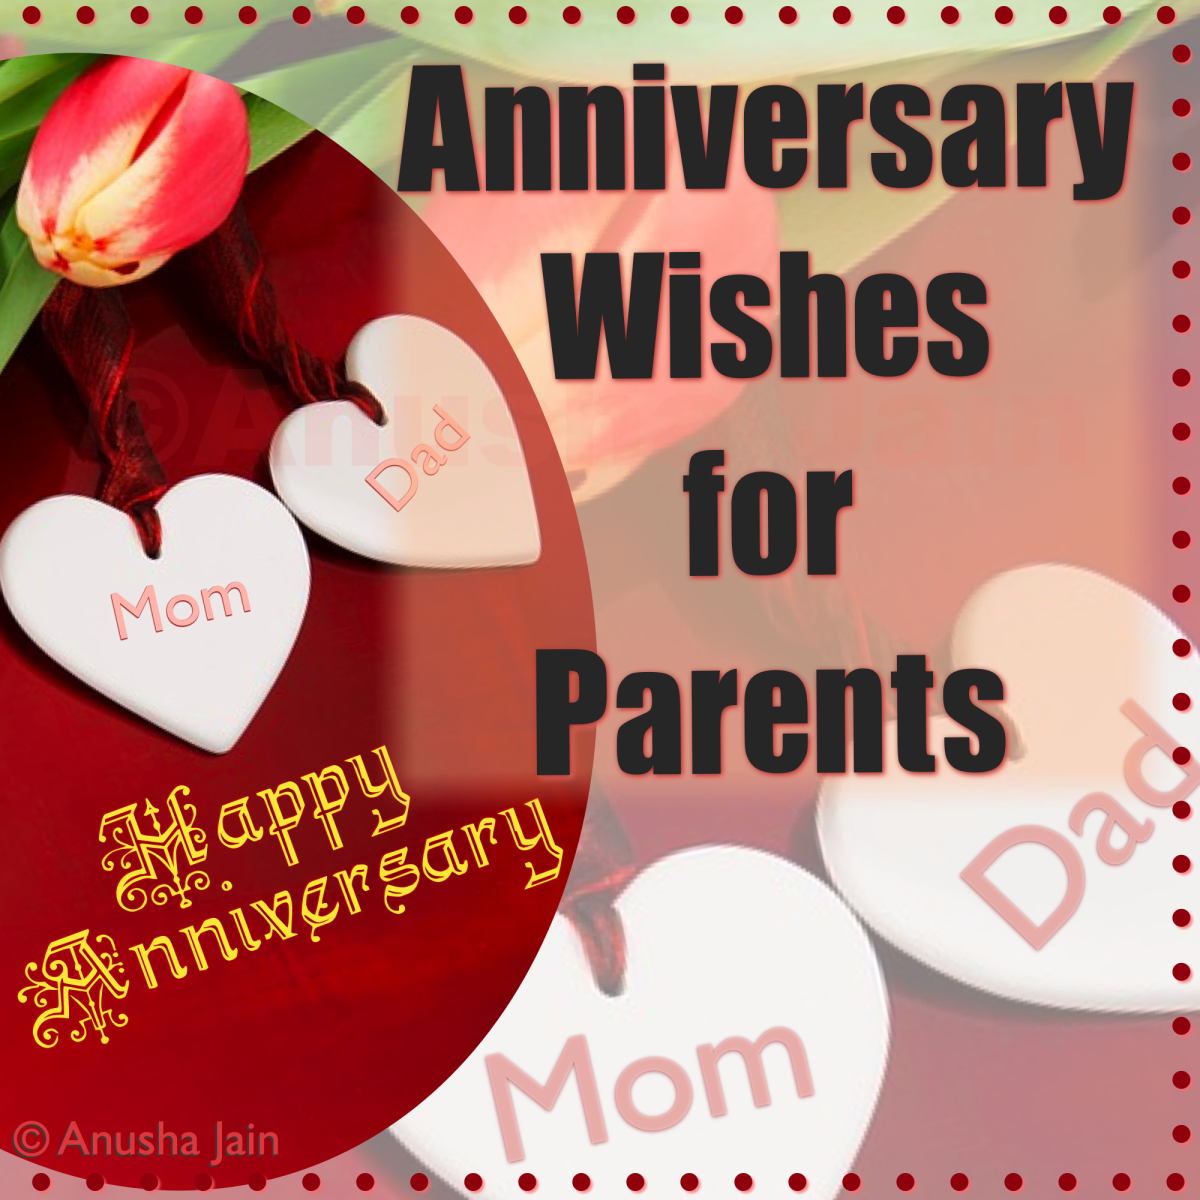 Happy Anniversary  Mom  Dad  Poems and Anniversary  Quotes  